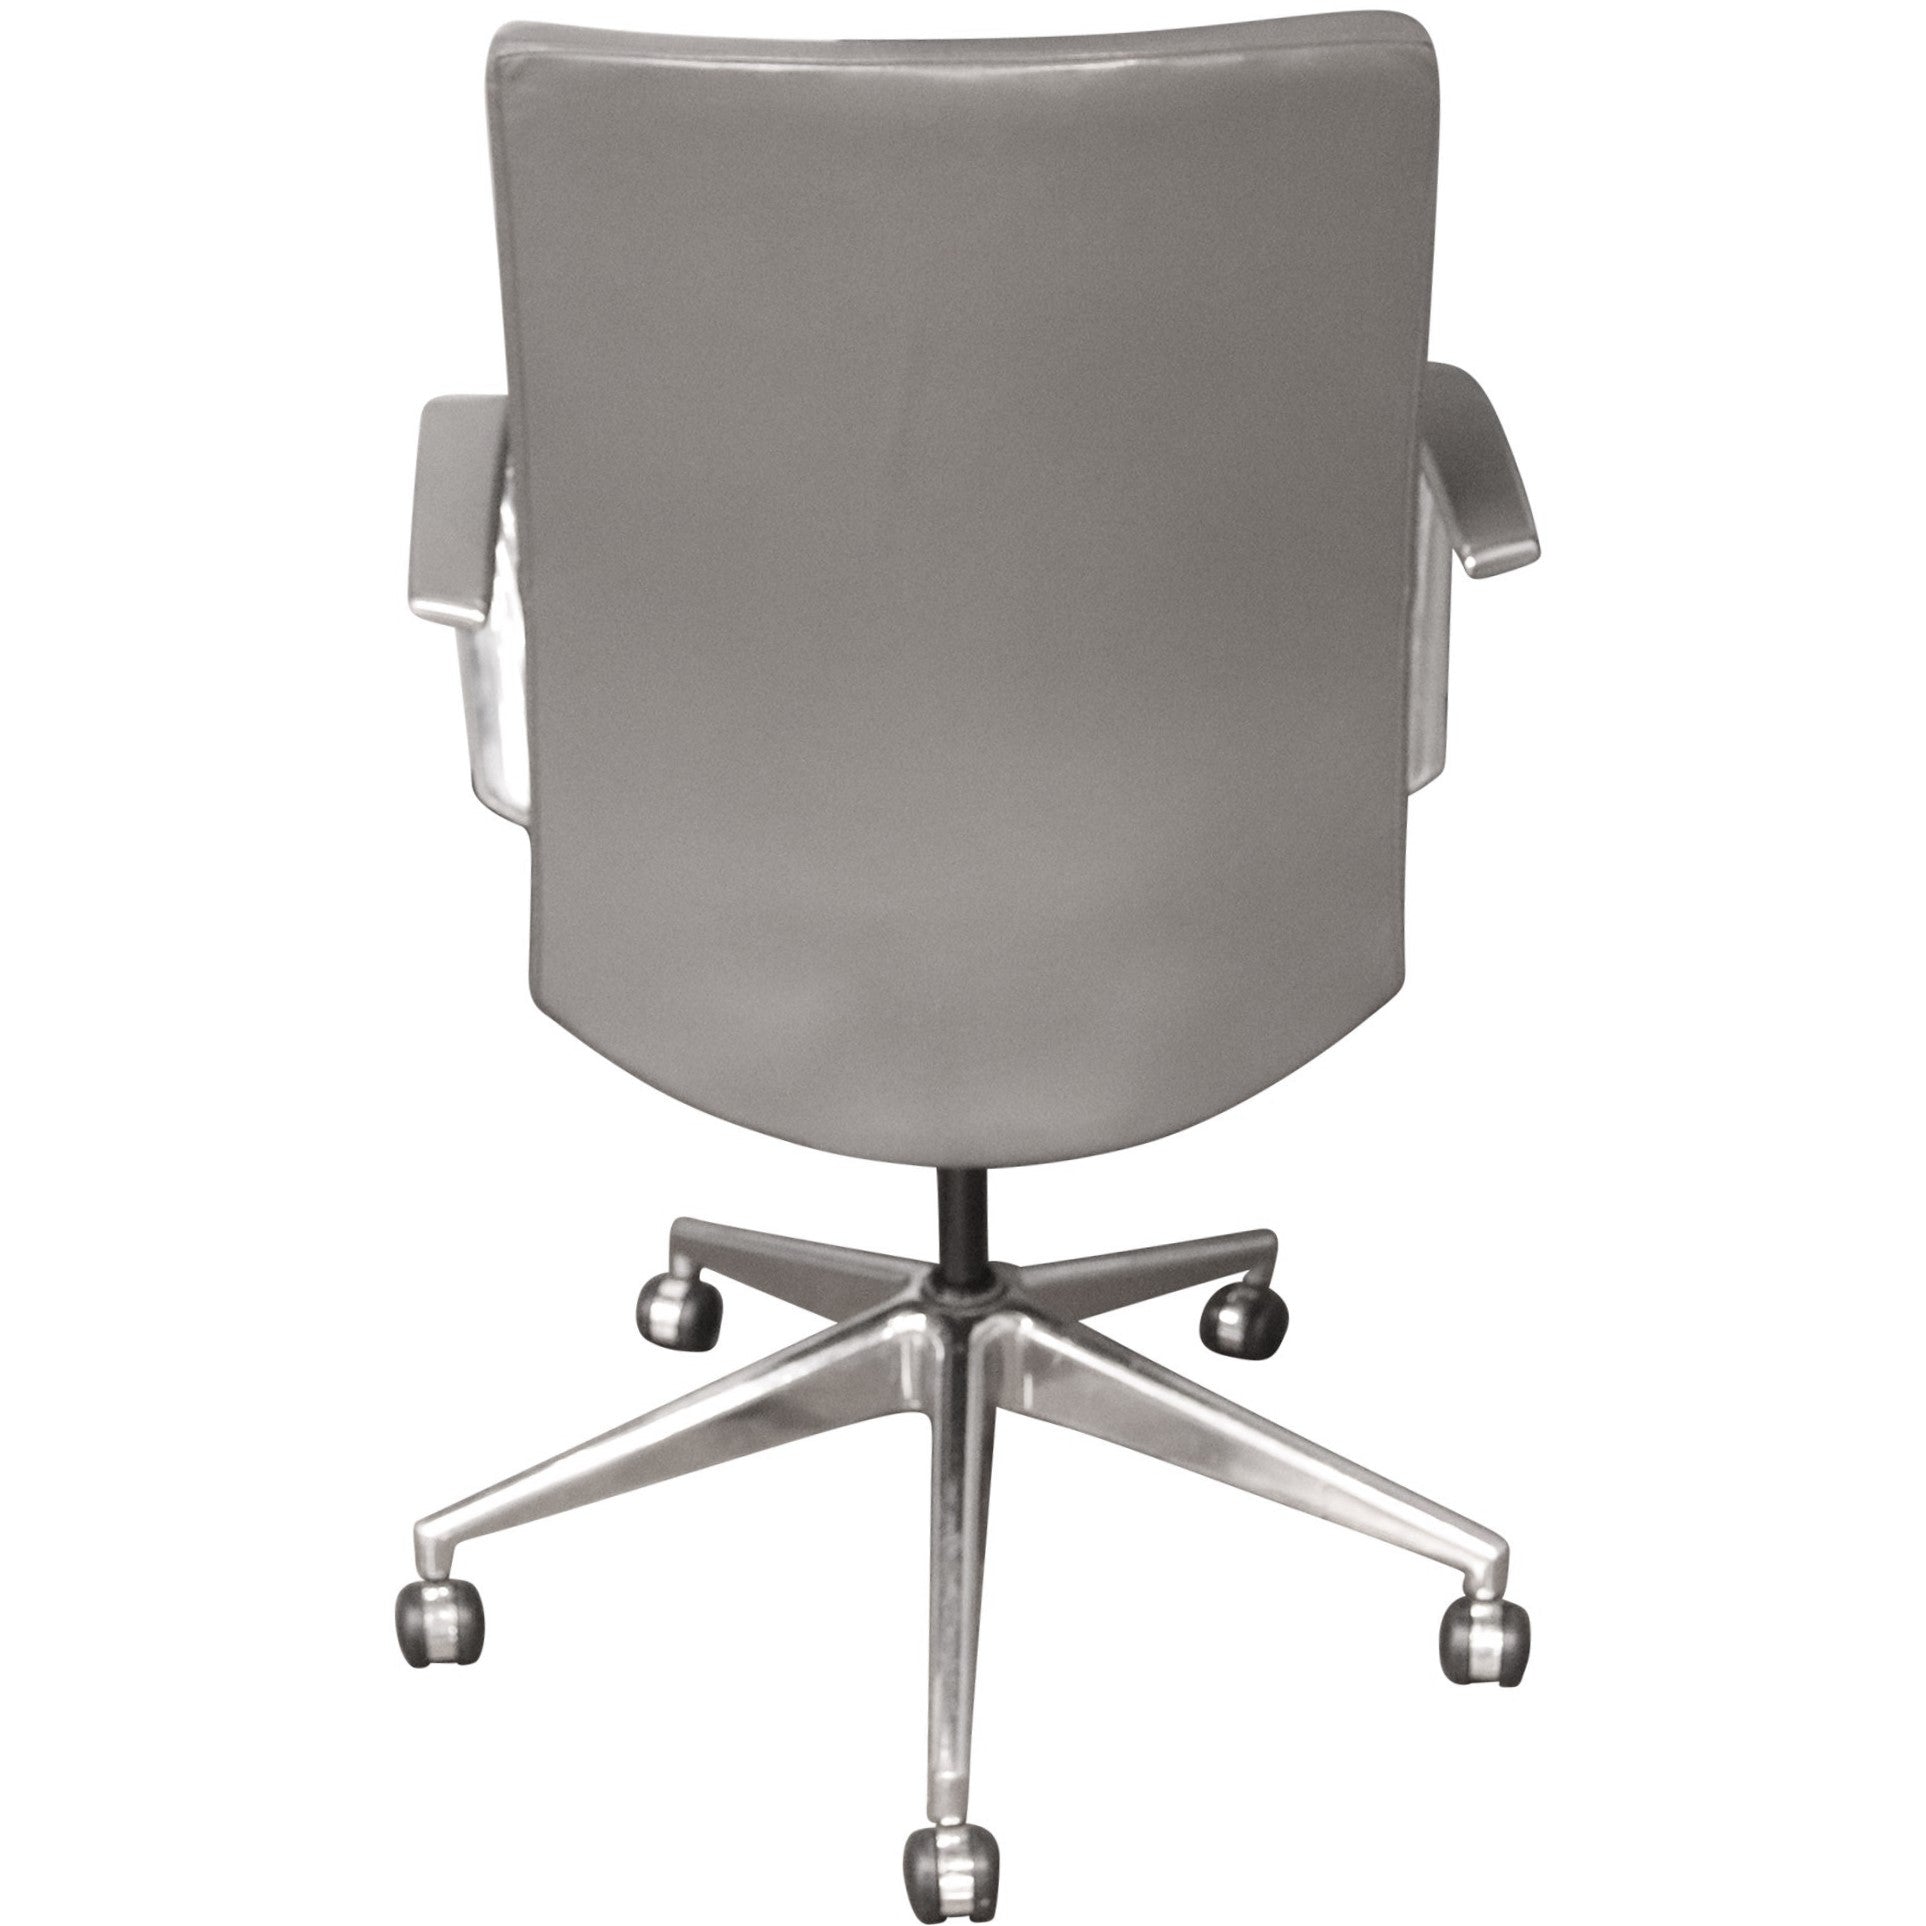 HBF Low Back Swivel Tilt Conference Chair, Slate Grey - Preowned